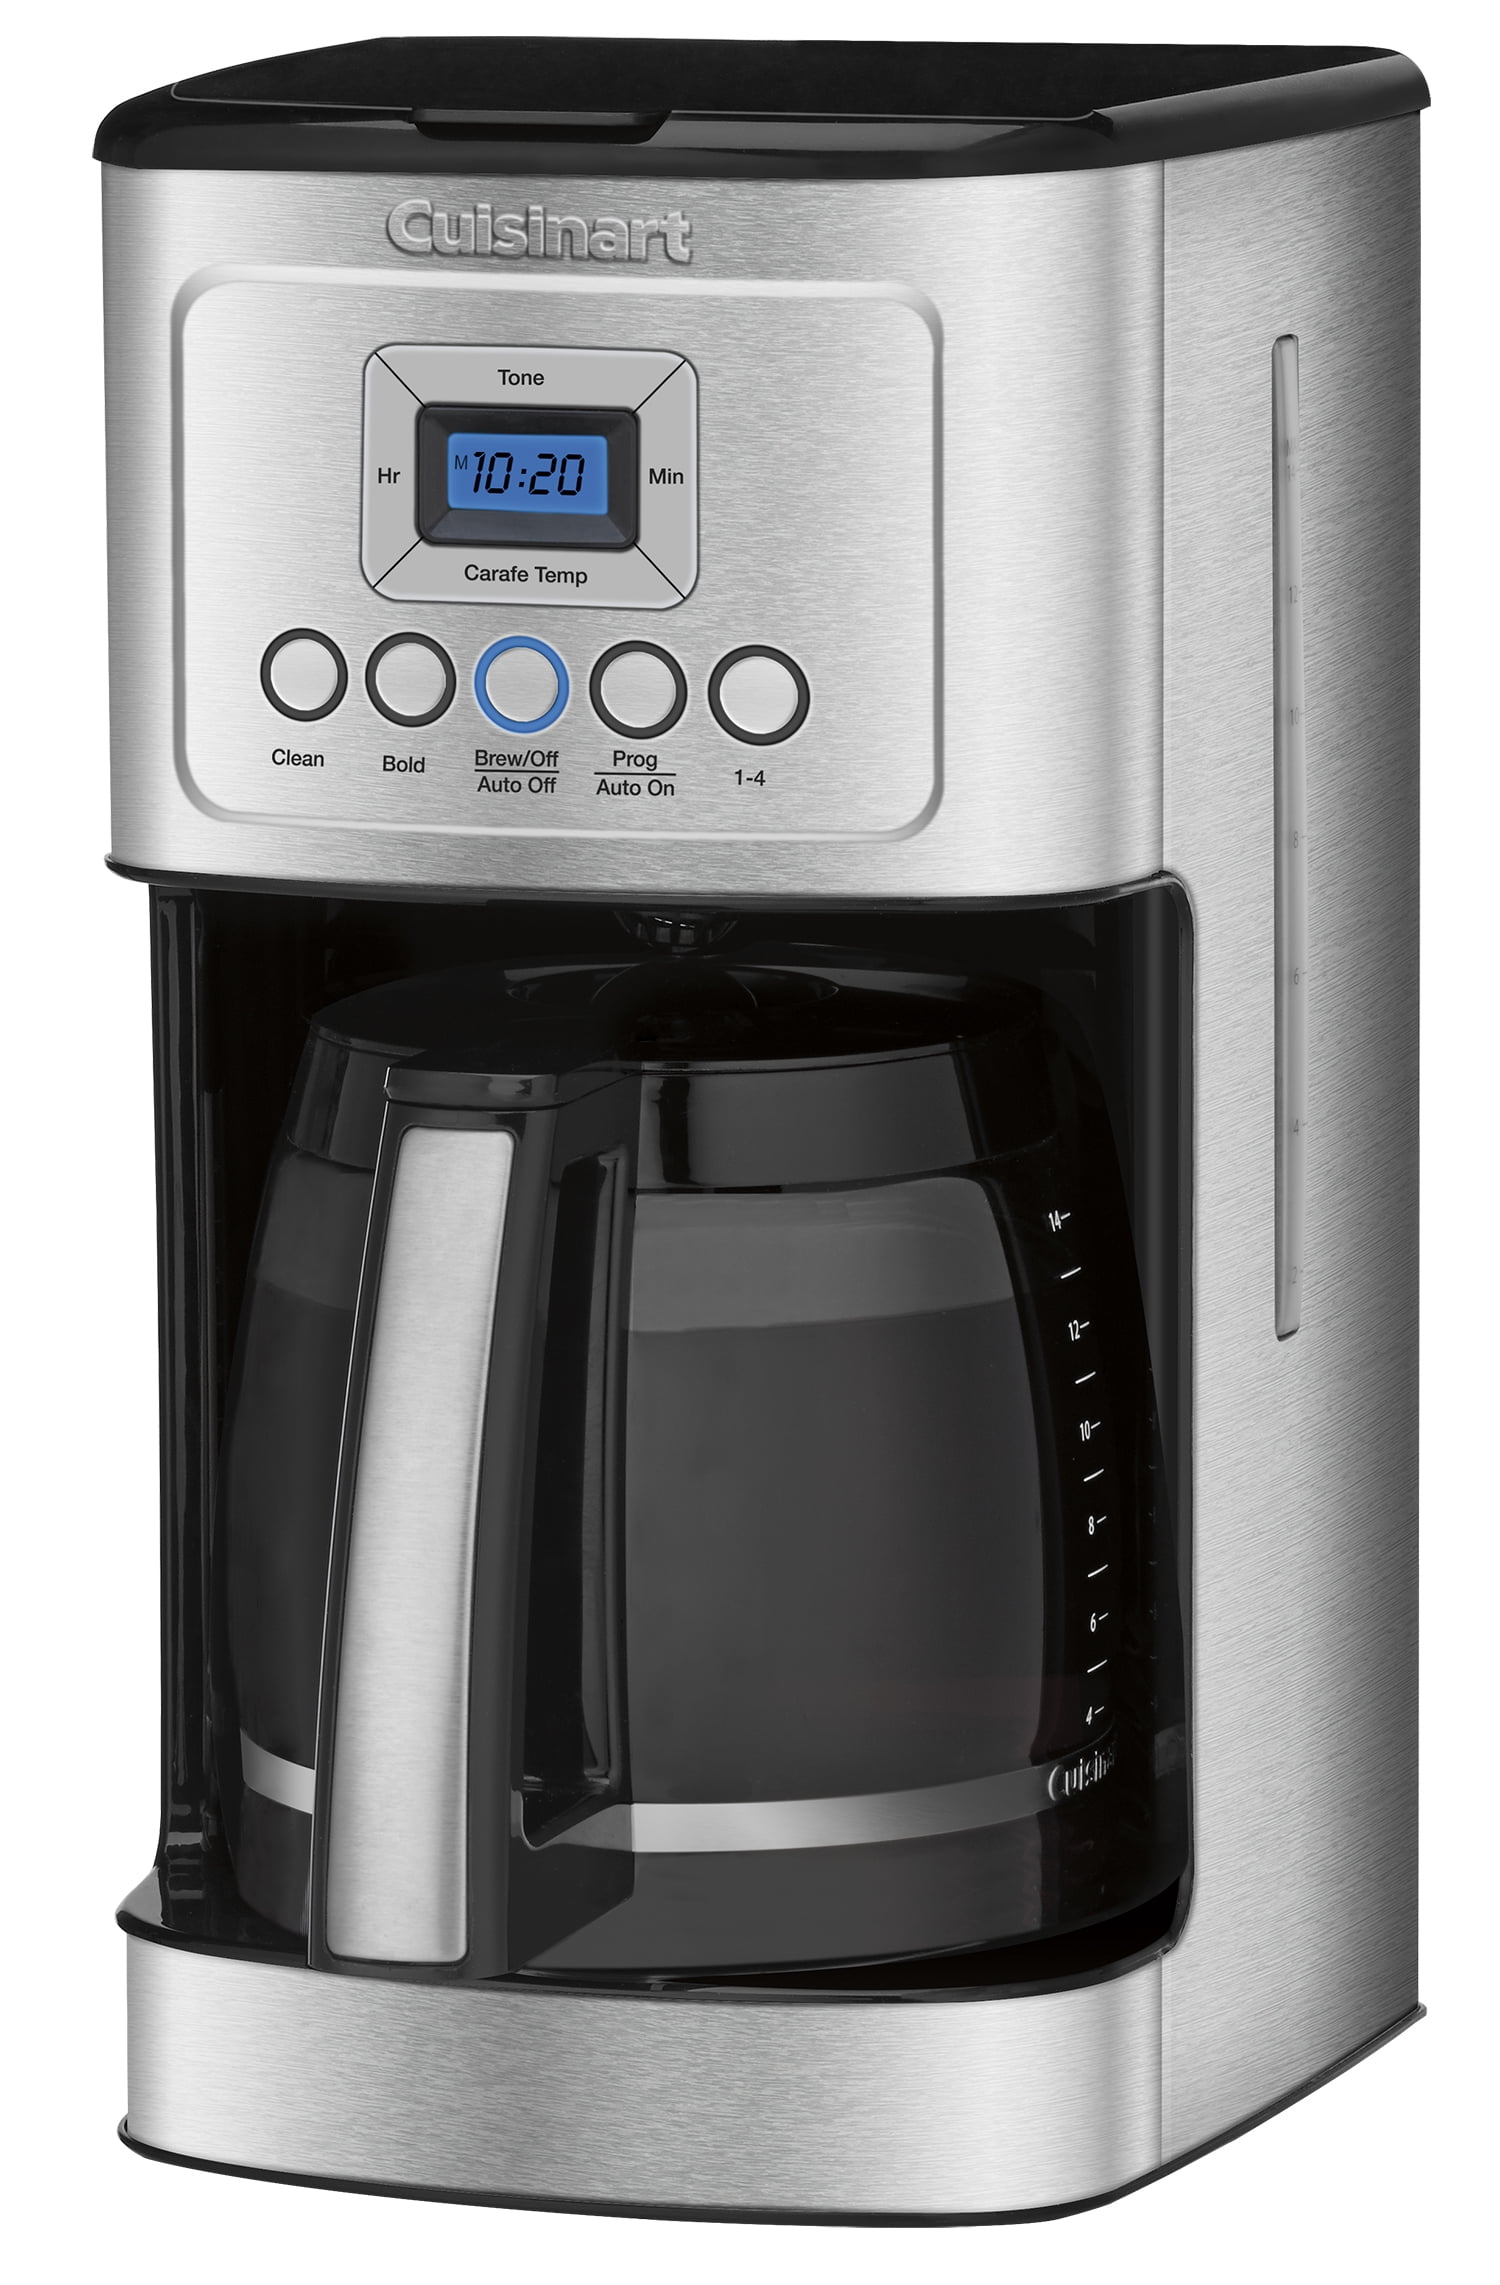 BLACK & DECKER Drip Under Cabinet 12 Cup Programmable Spacemaker Coffee  Maker SDC740-White (Brand New. Factory Sealed. Warranty. Fast Free Shipping)